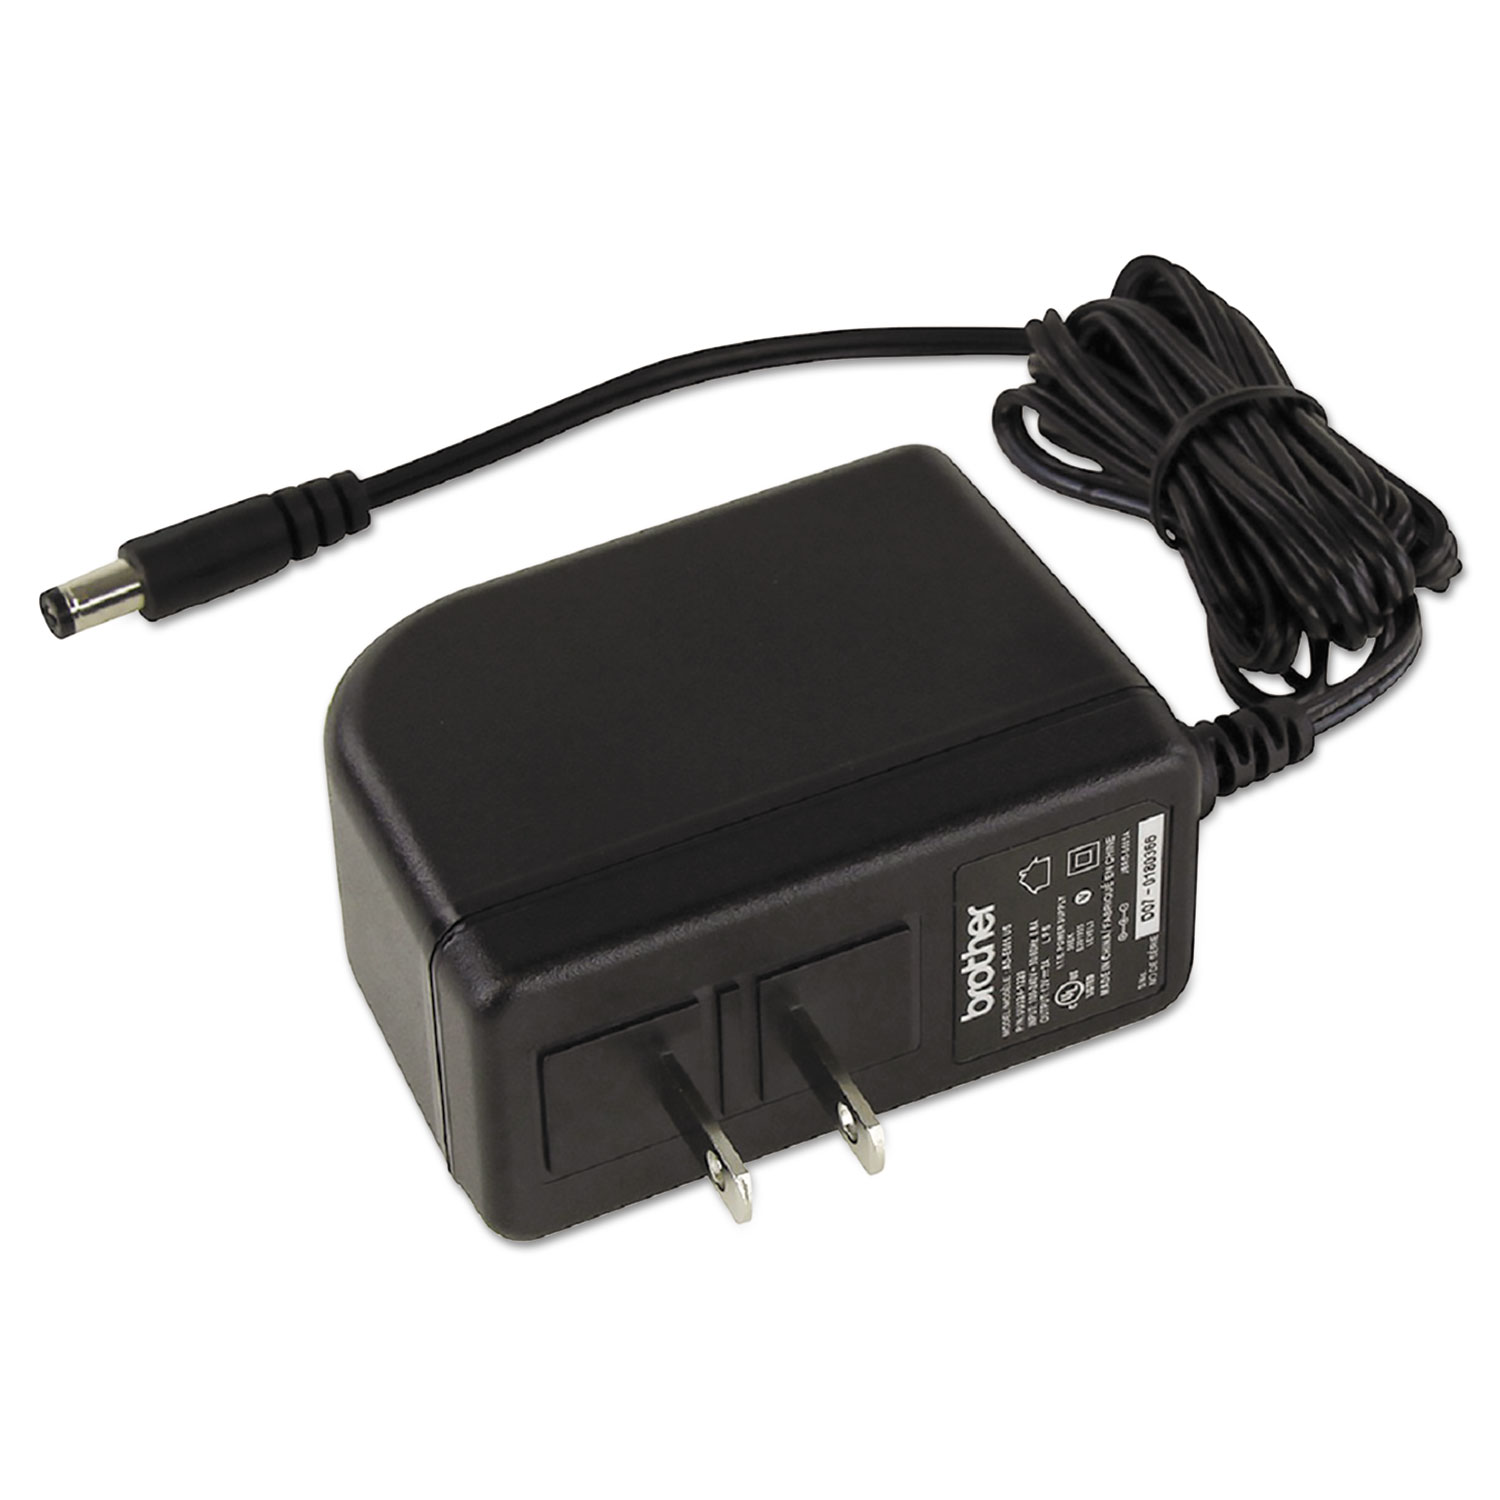  Brother ADE001 AC Adapter for P-Touch Label Makers (BRTADE001) 